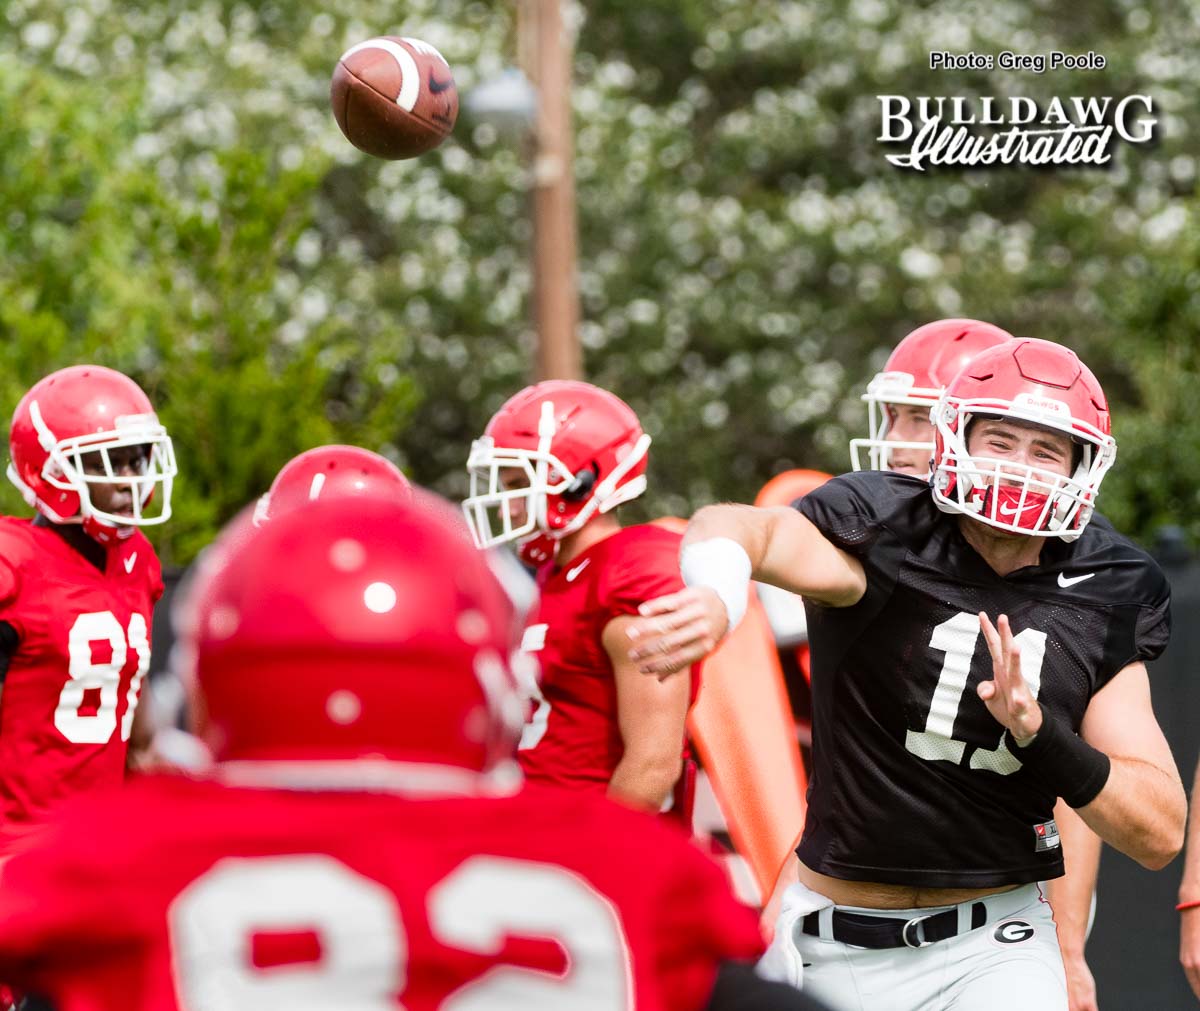 The freshman QB Jake Fromm (11) lets one rip - UGA football practice, Monday, Aug. 28, 2017 -